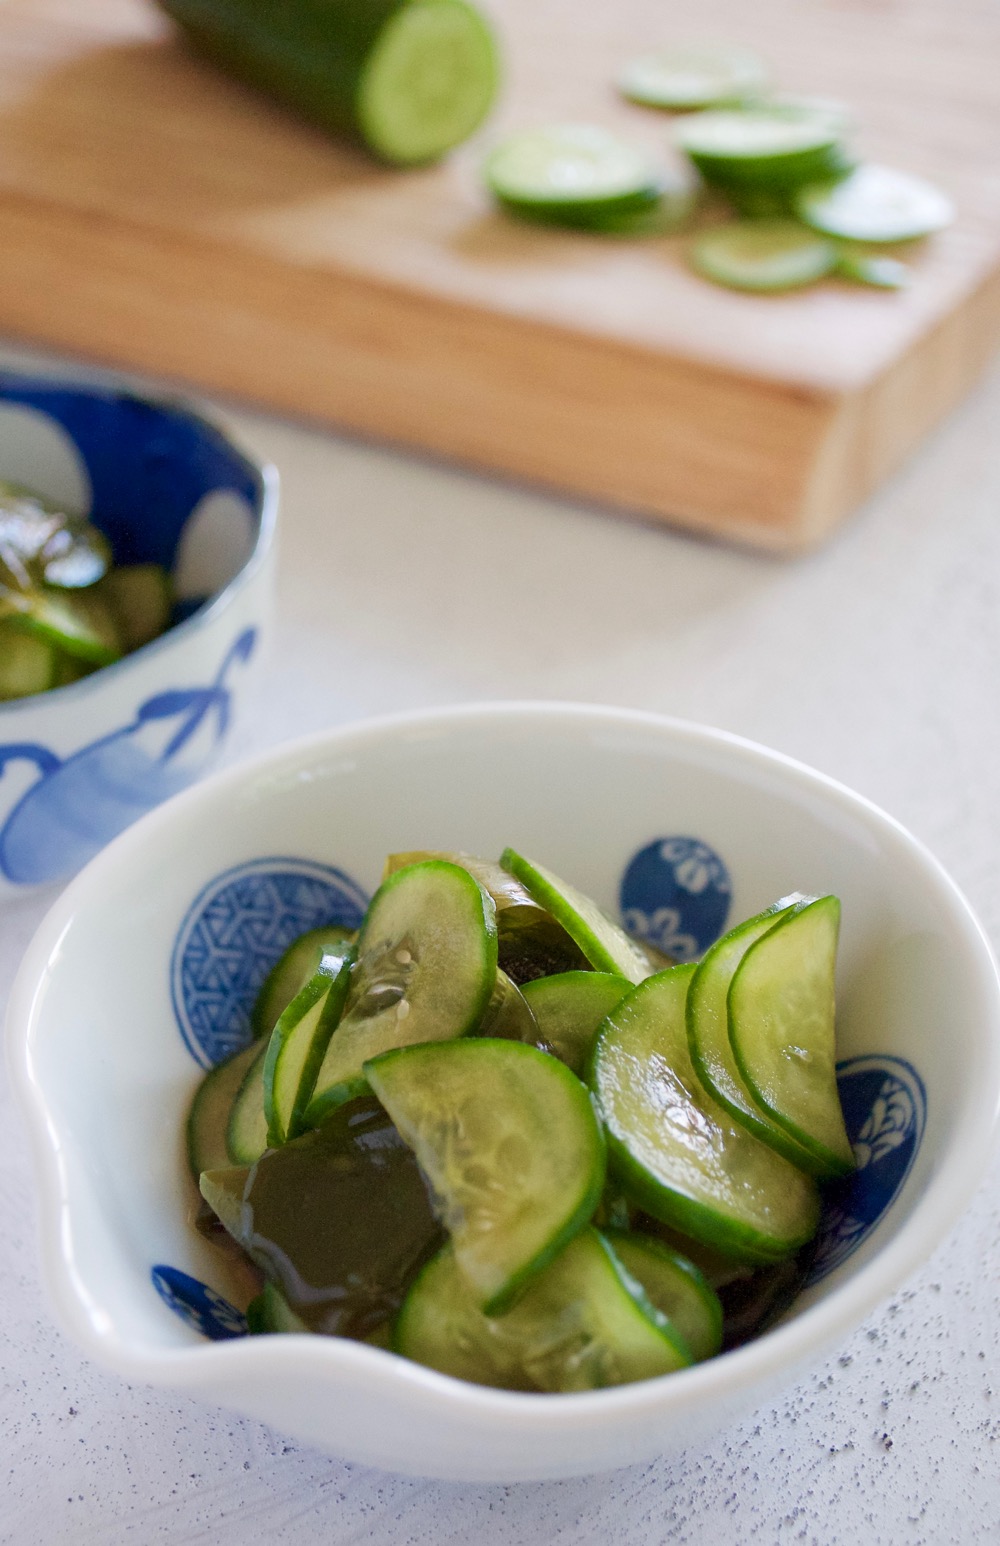 The most popular combination of Sunomono (vinegar Dressing) is this cucumber and Wakame seaweed. Simple to make and delicious.